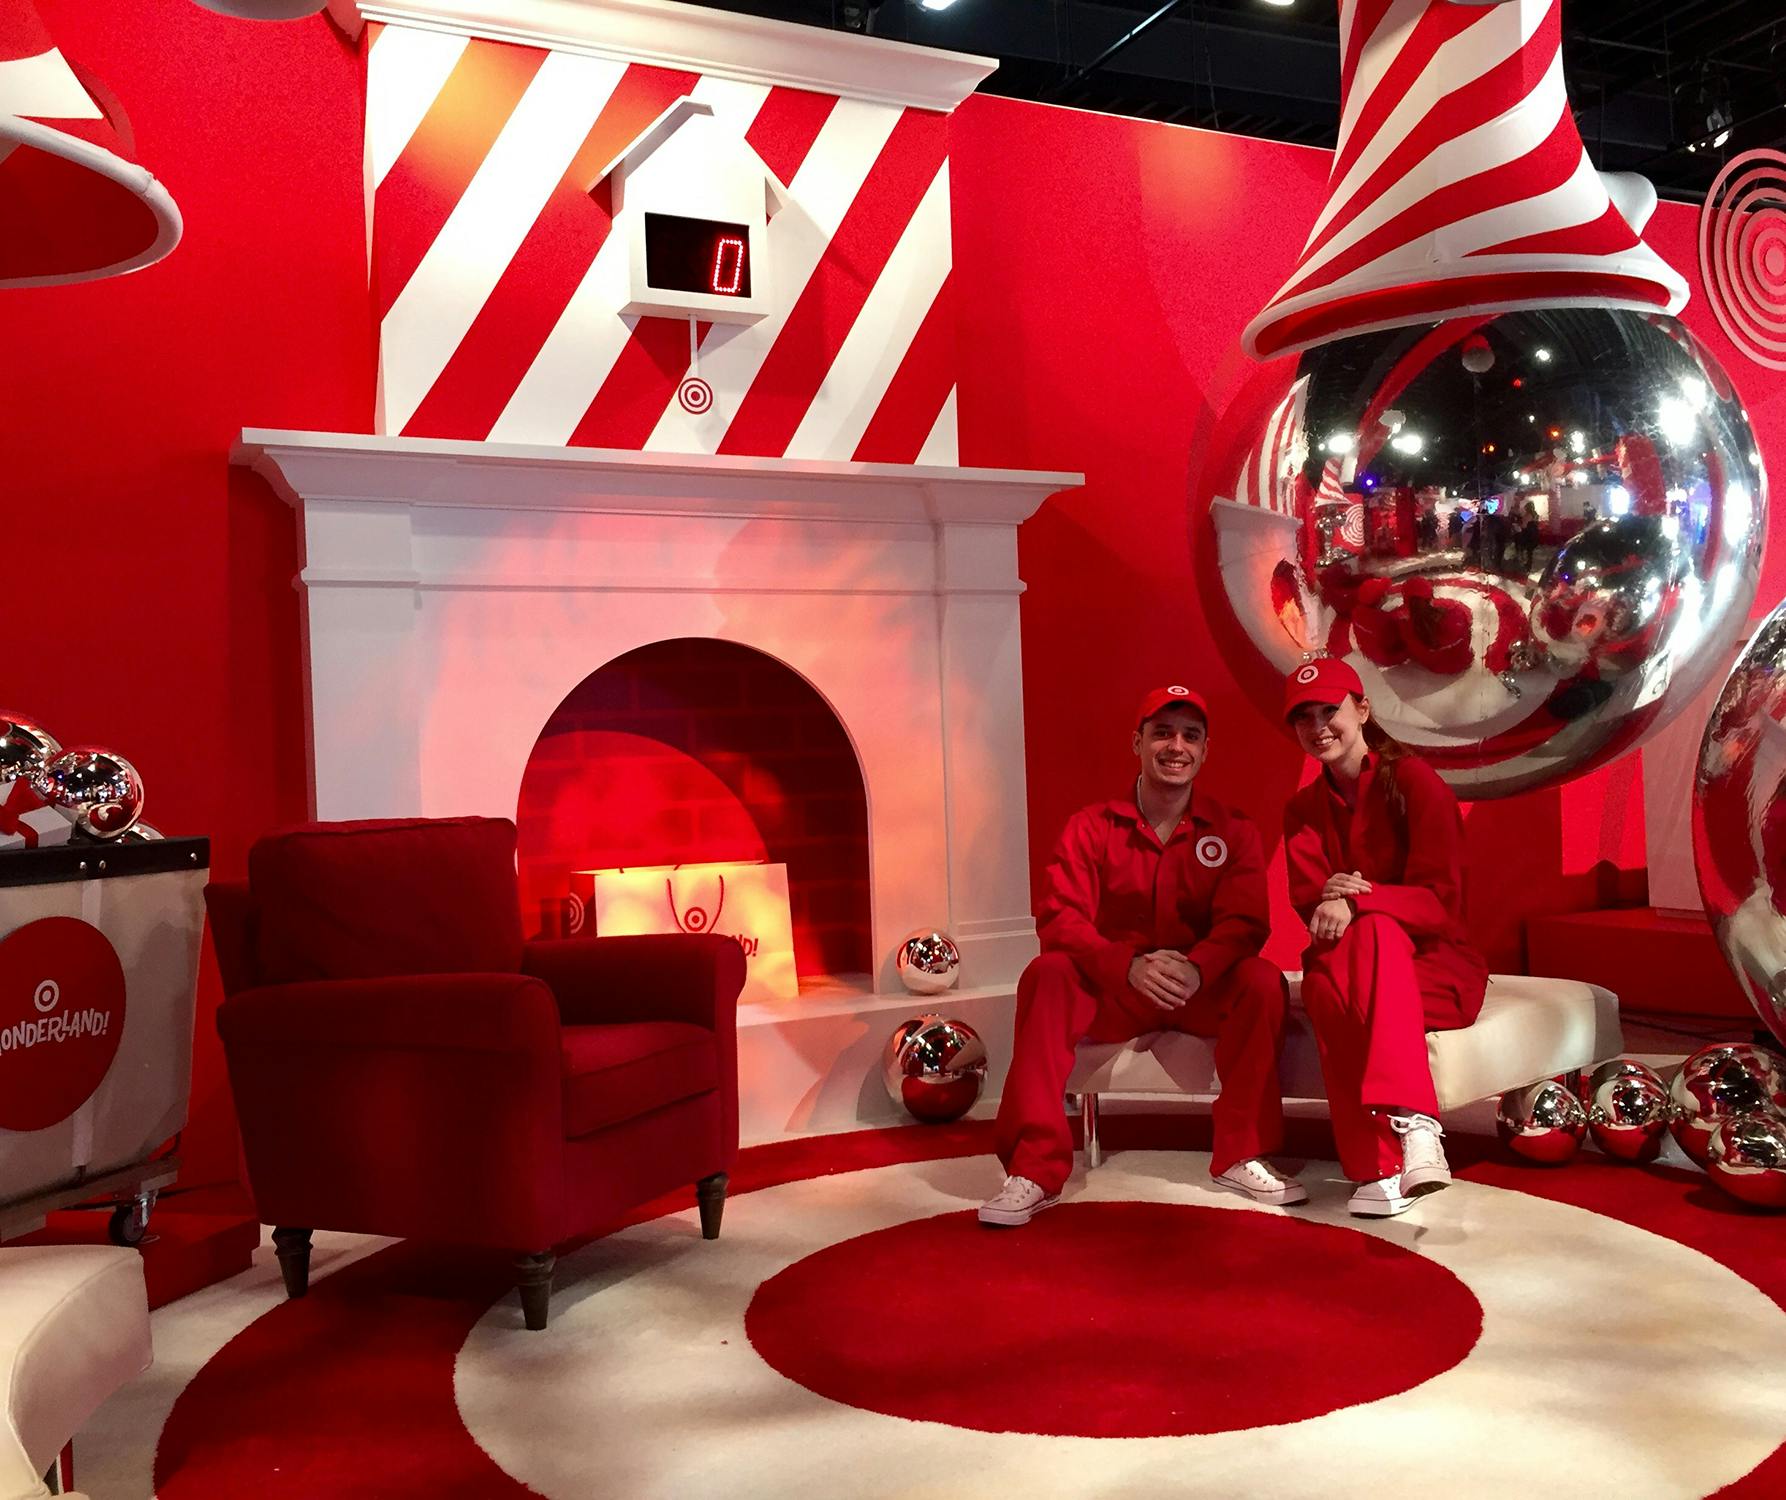 Target opens a holiday-themed playground to sell toys and test